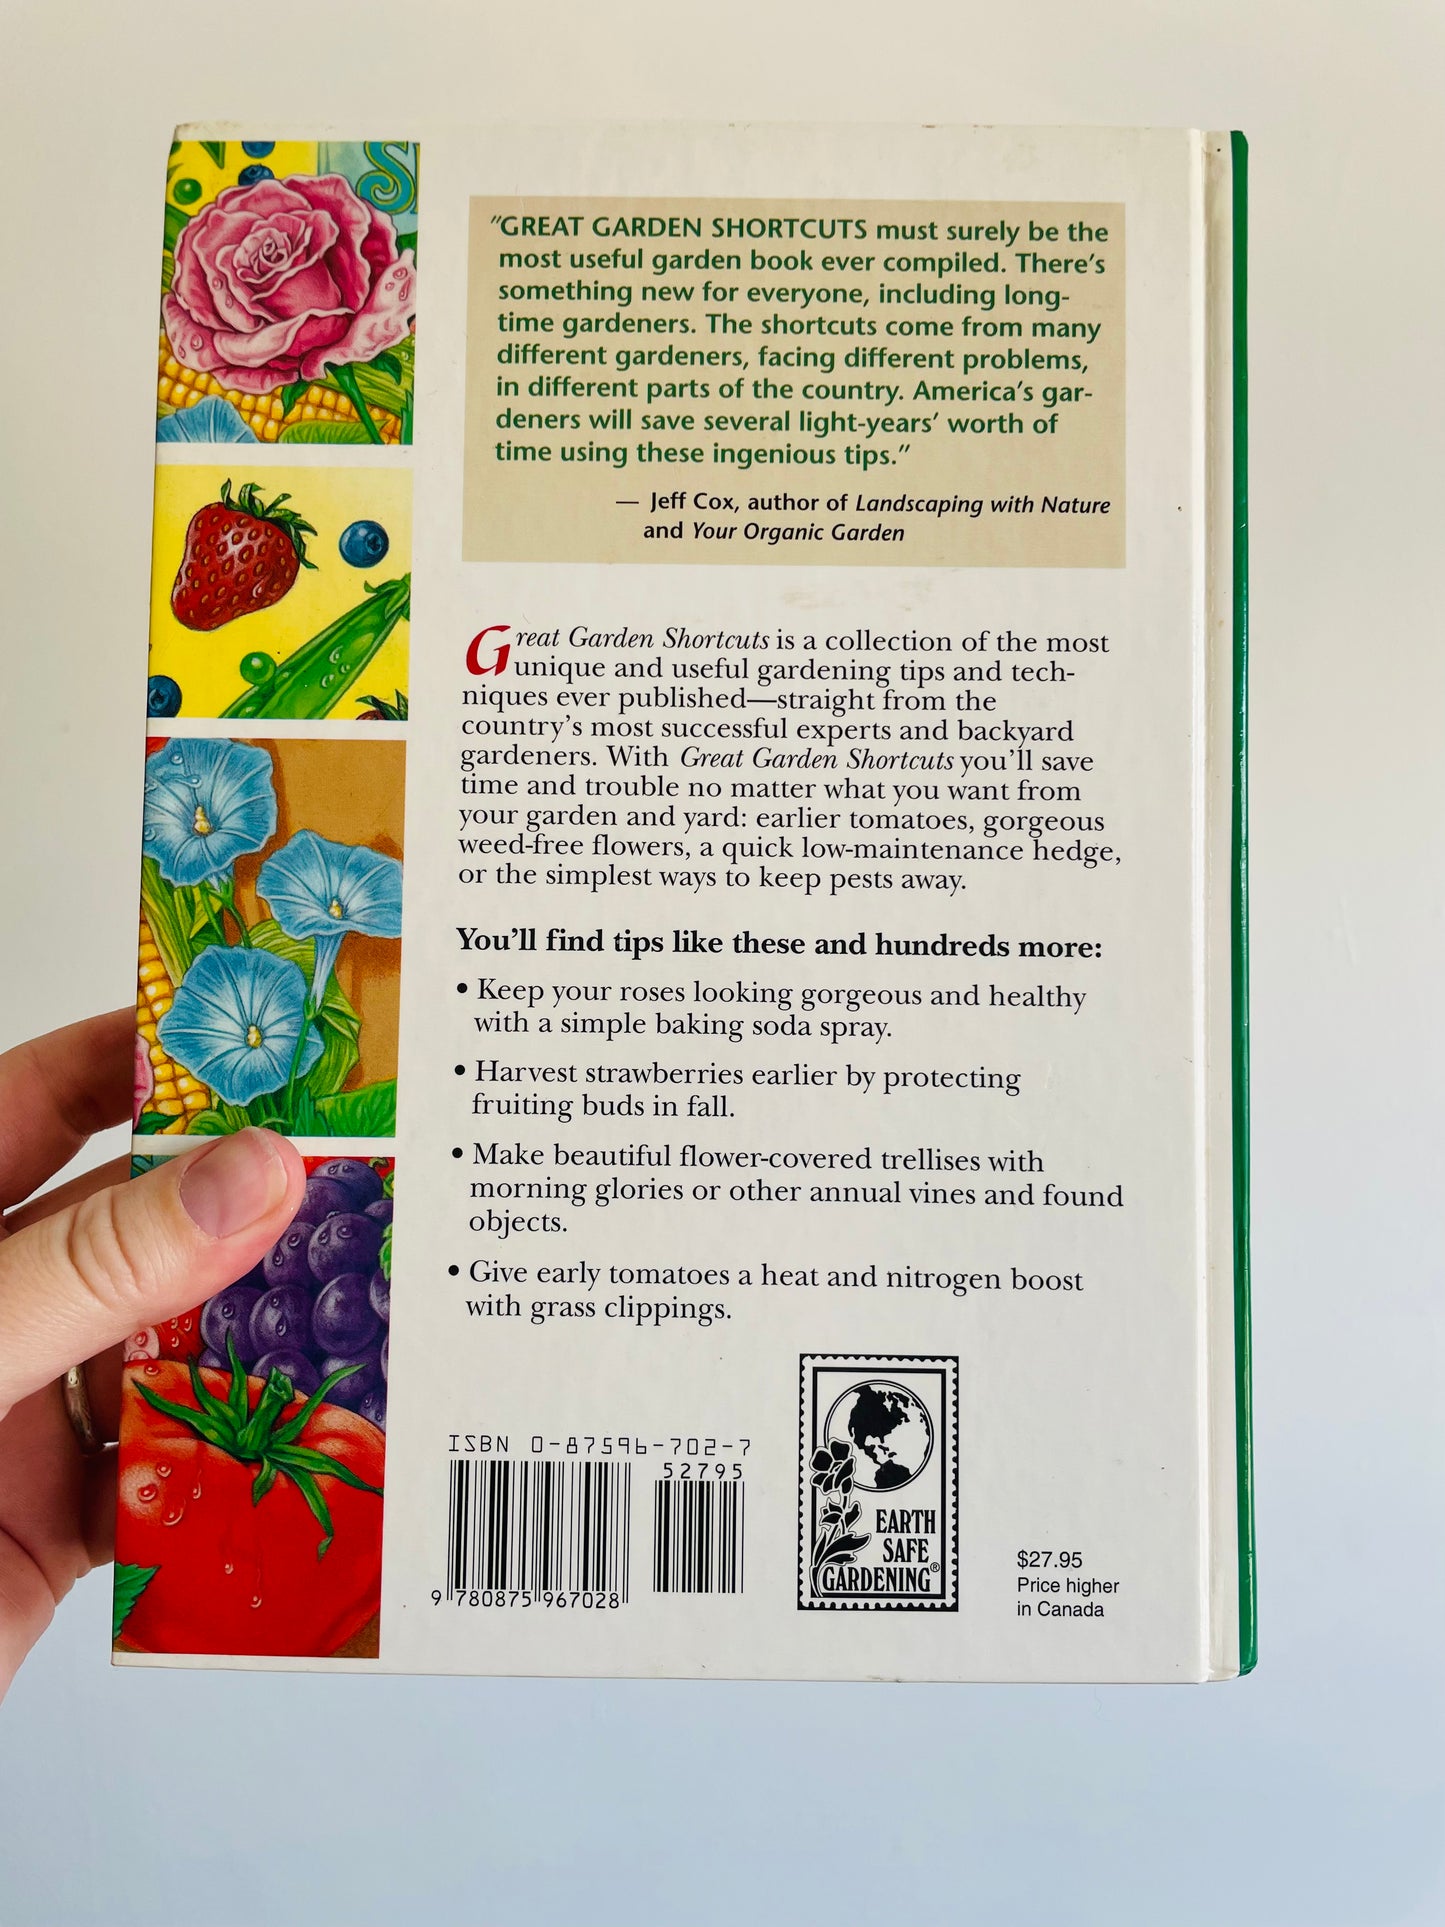 Great Garden Shortcuts by Rodale Press Hardcover Book (1996)